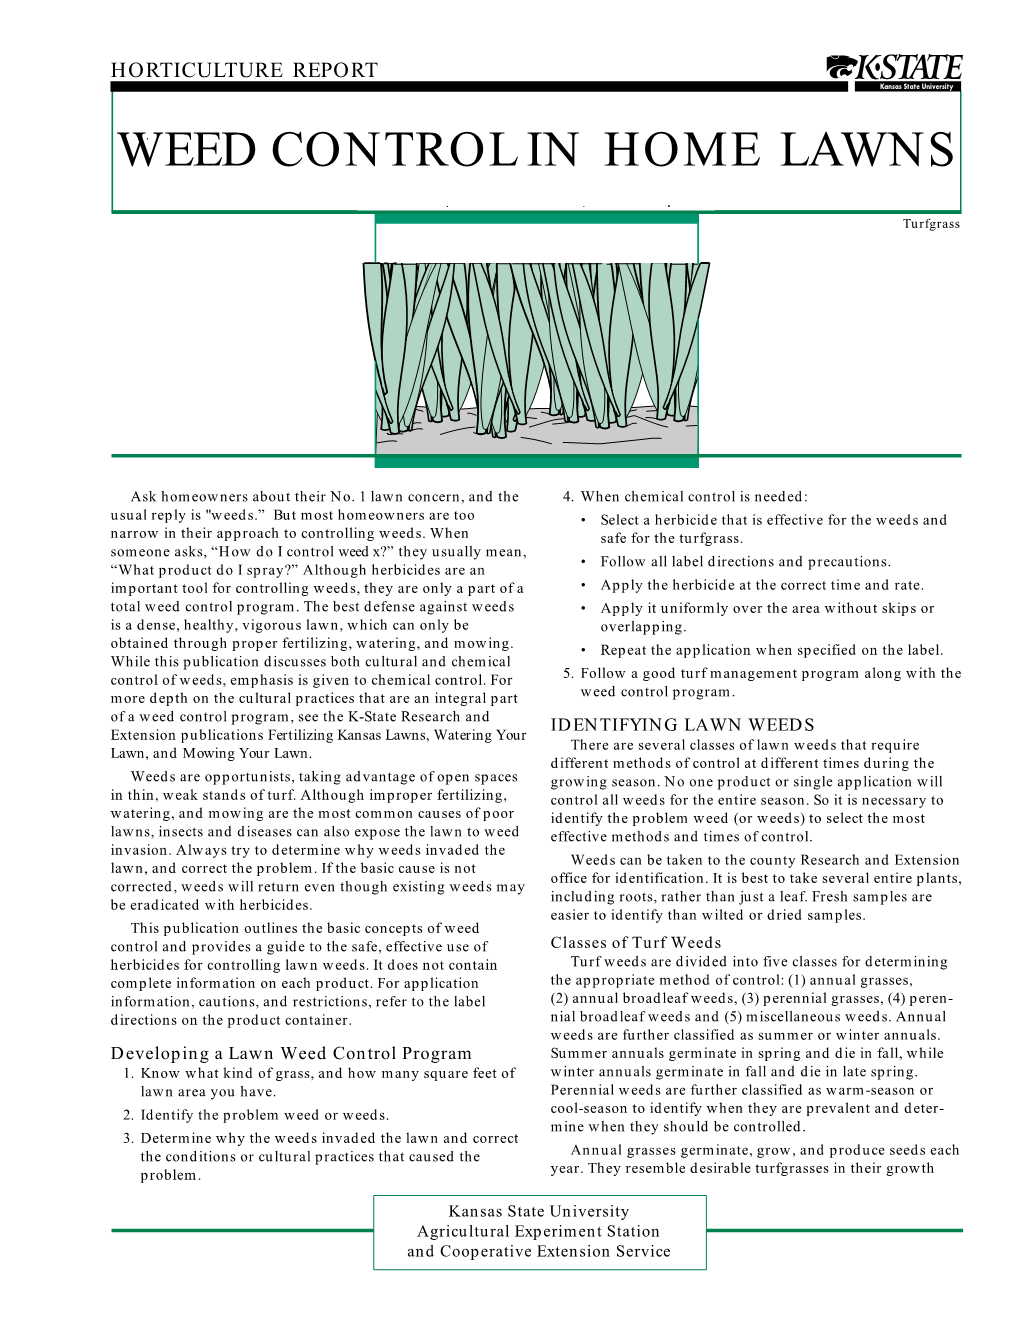 MF2385 Weed Control in Home Lawns